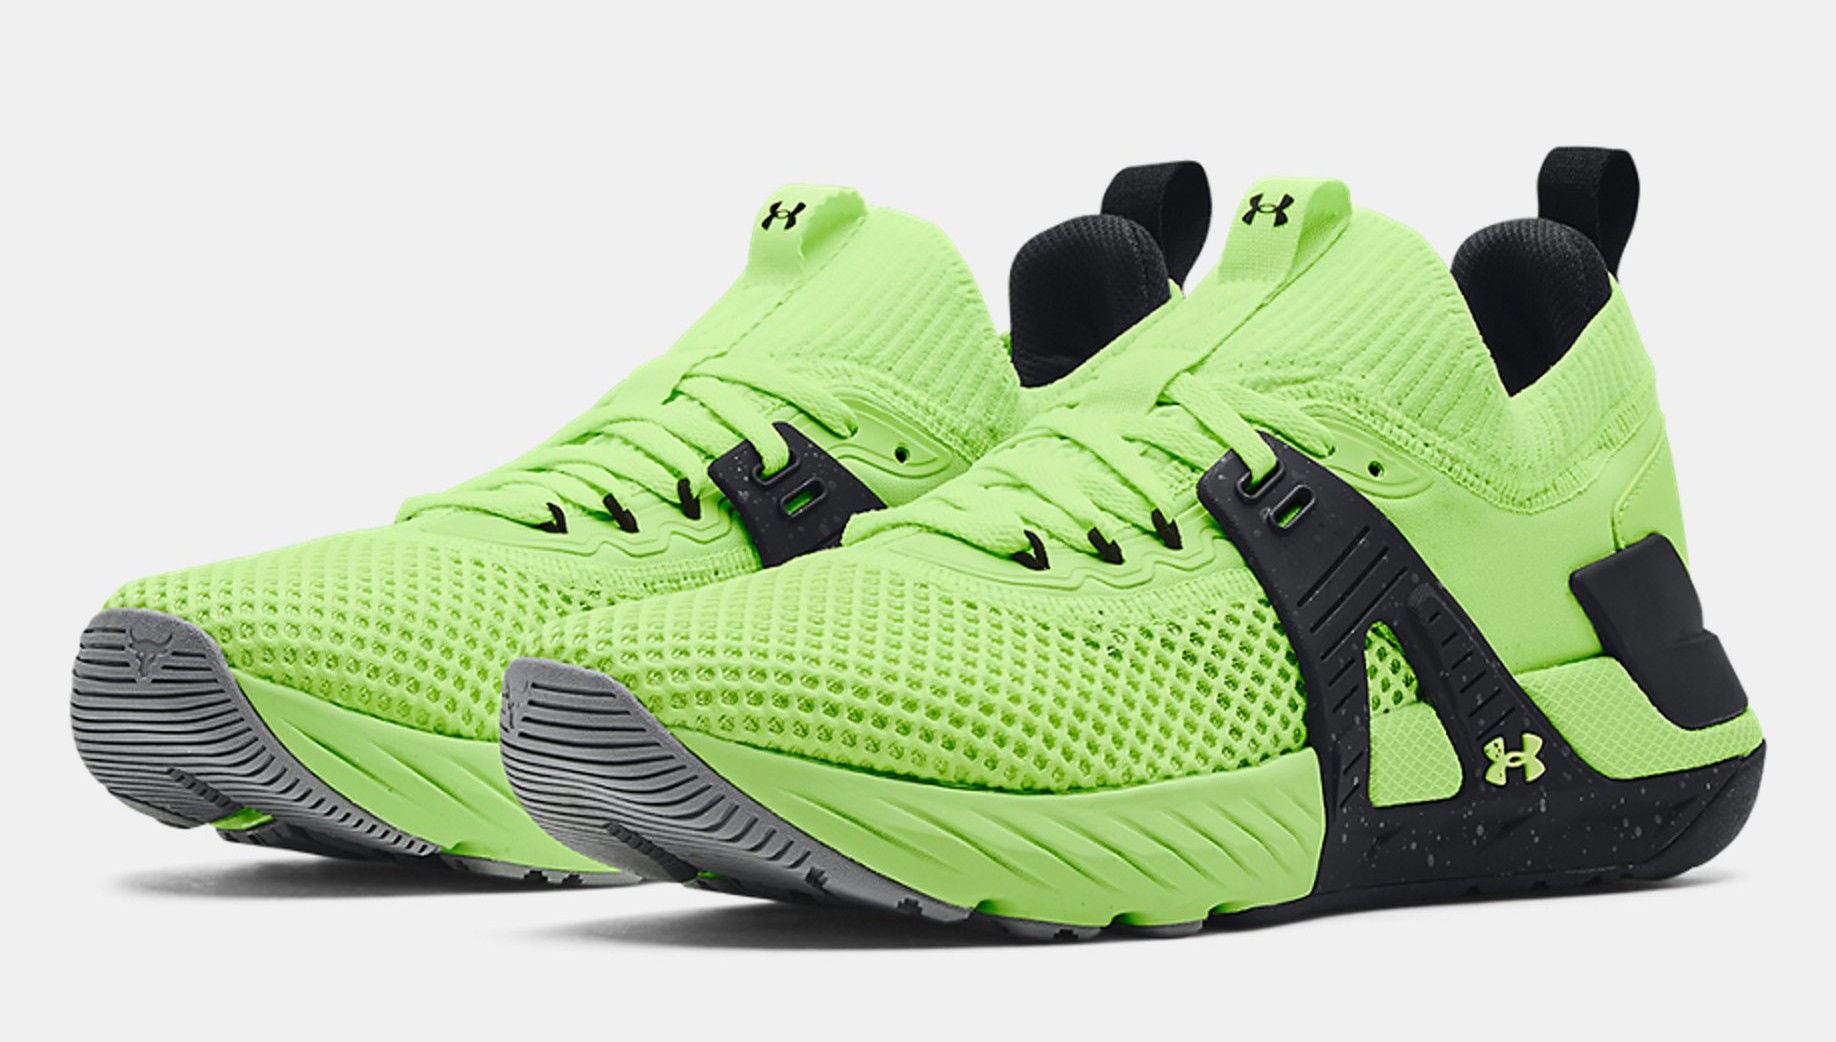 Project Rock 4 Under Armour Shoes in Lime Black